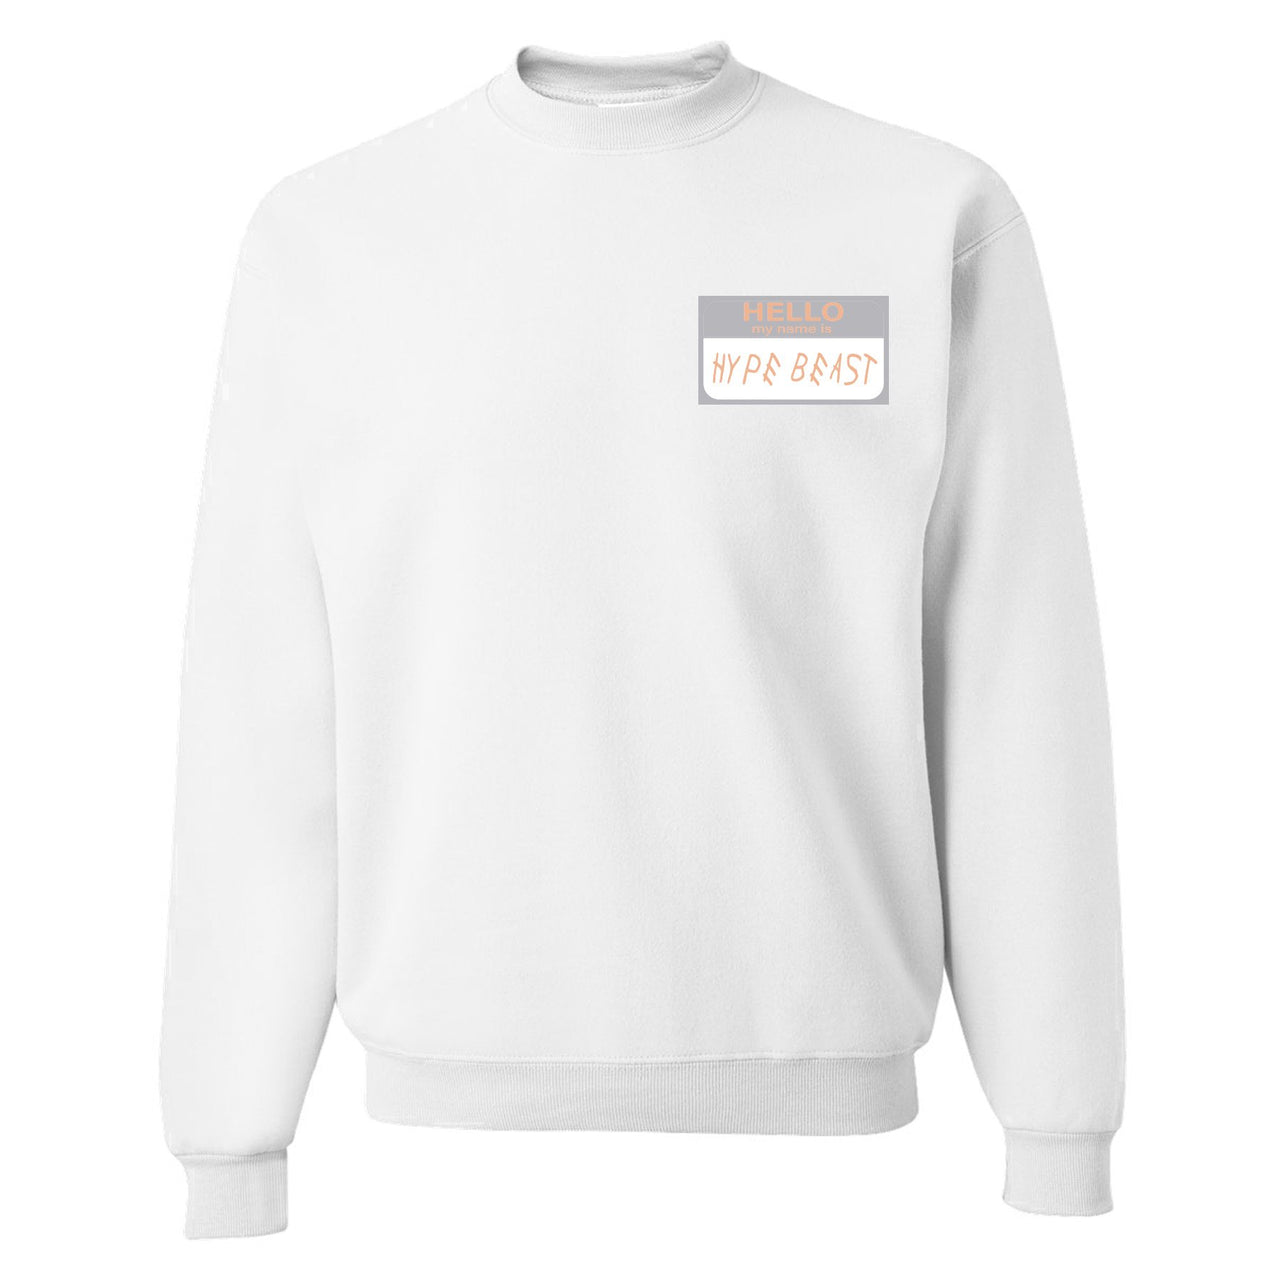 True Form v2 350s Crewneck Sweater | Hello My Name Is Hype Beast Woe, White